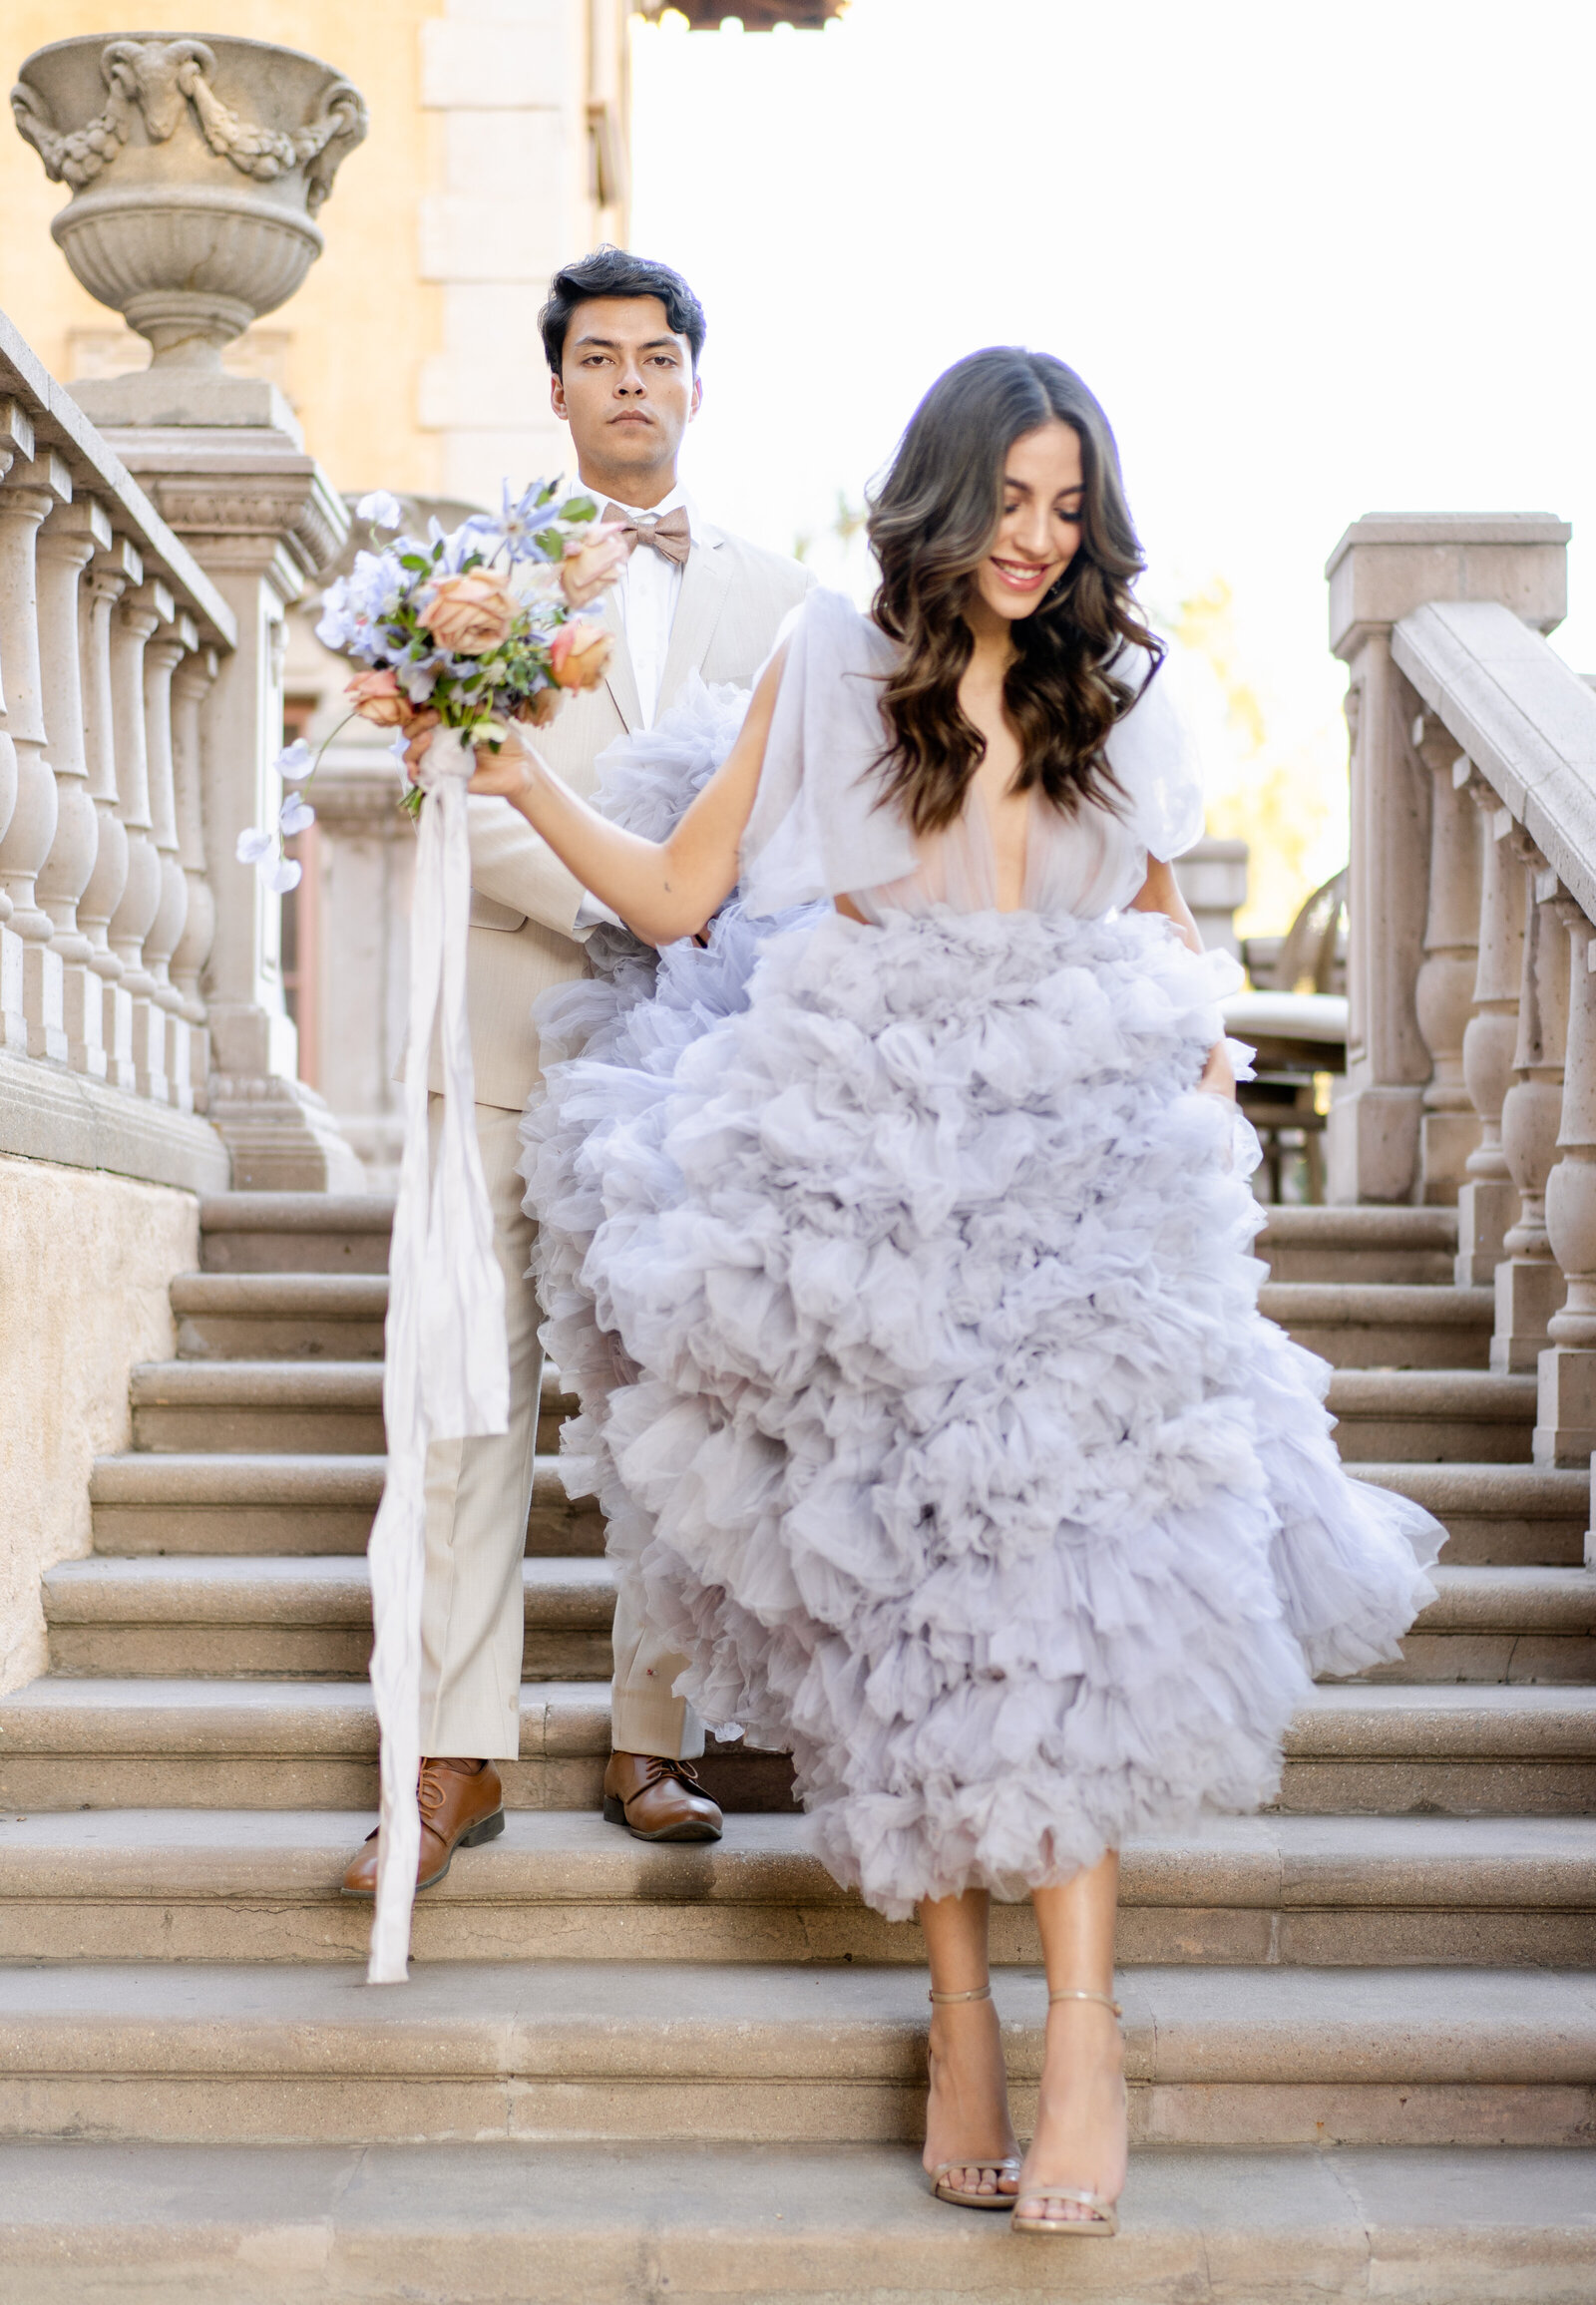 A bride and groom in a lavender wedding gown and cream suit standing on a concrete staircase outdoors.